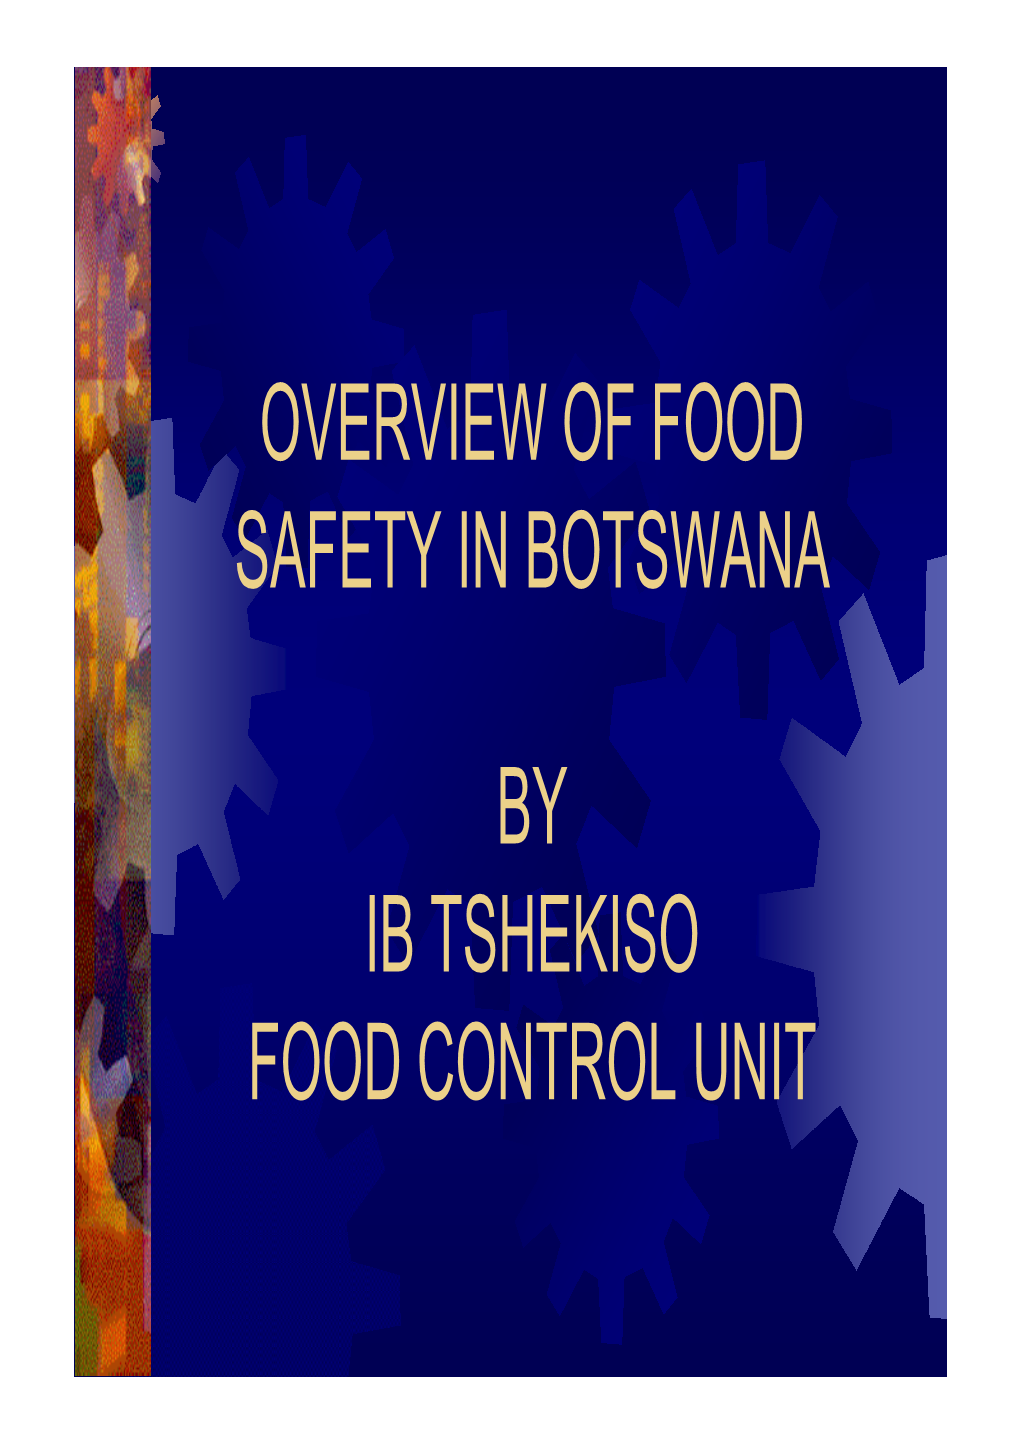 Overview of Food Safety in Botswana by Ib Tshekiso